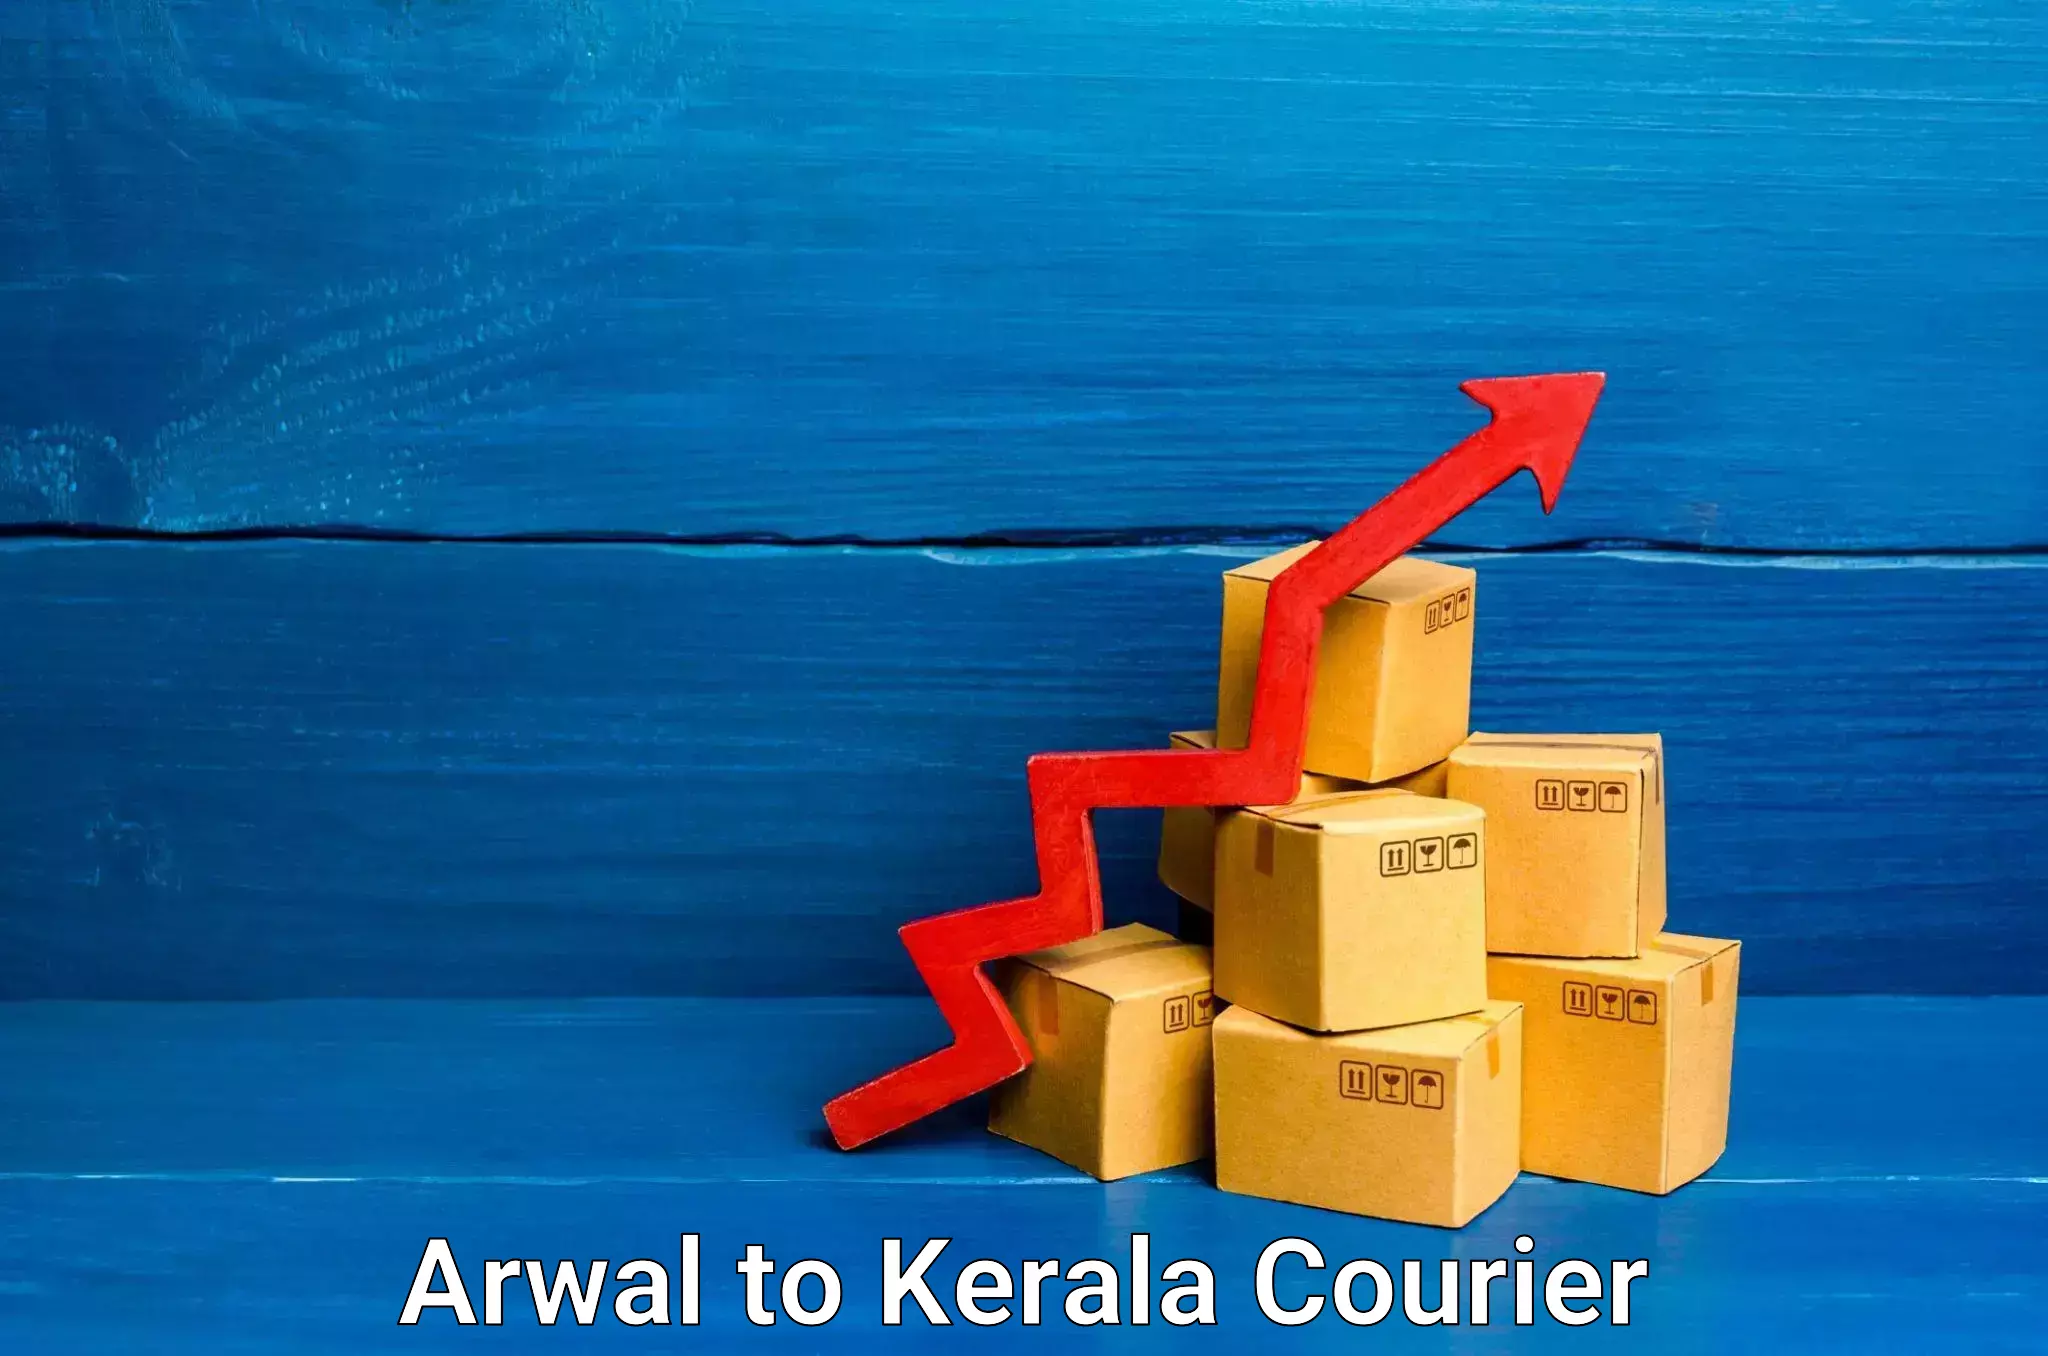 Furniture delivery service Arwal to Kerala